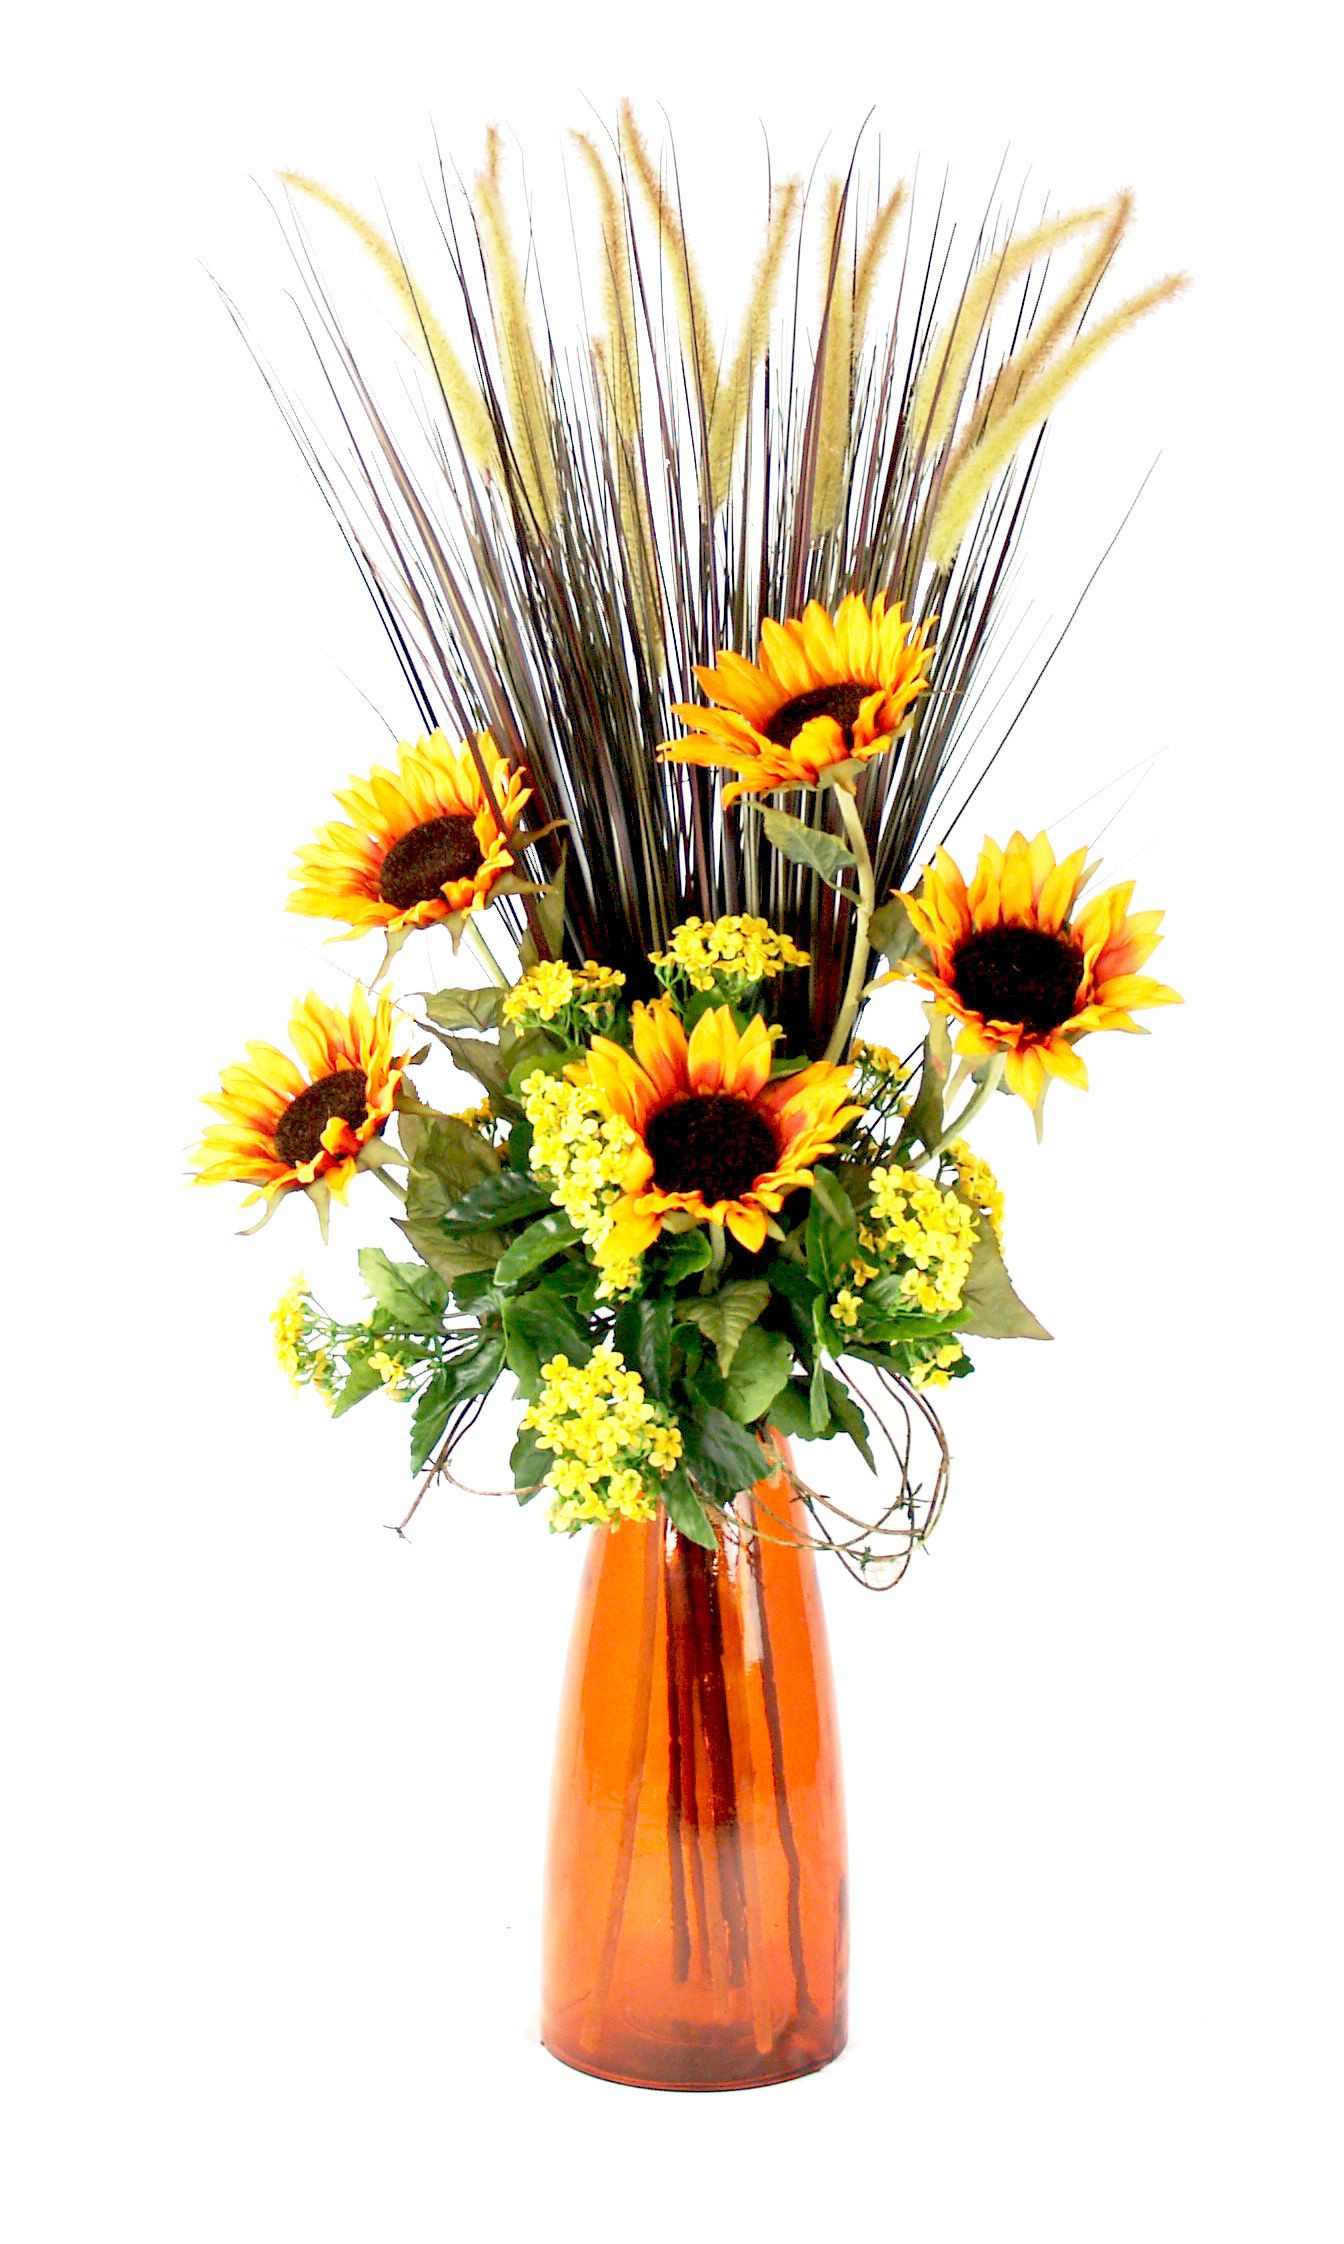 22 Nice Hobby Lobby Cemetery Vases 2024 free download hobby lobby cemetery vases of cdfl326 in 2018 flower pinterest flowers floral and floral within cdfl326 tall arrangement with wheat grass sunflowers and an amber translucent glass vase avail